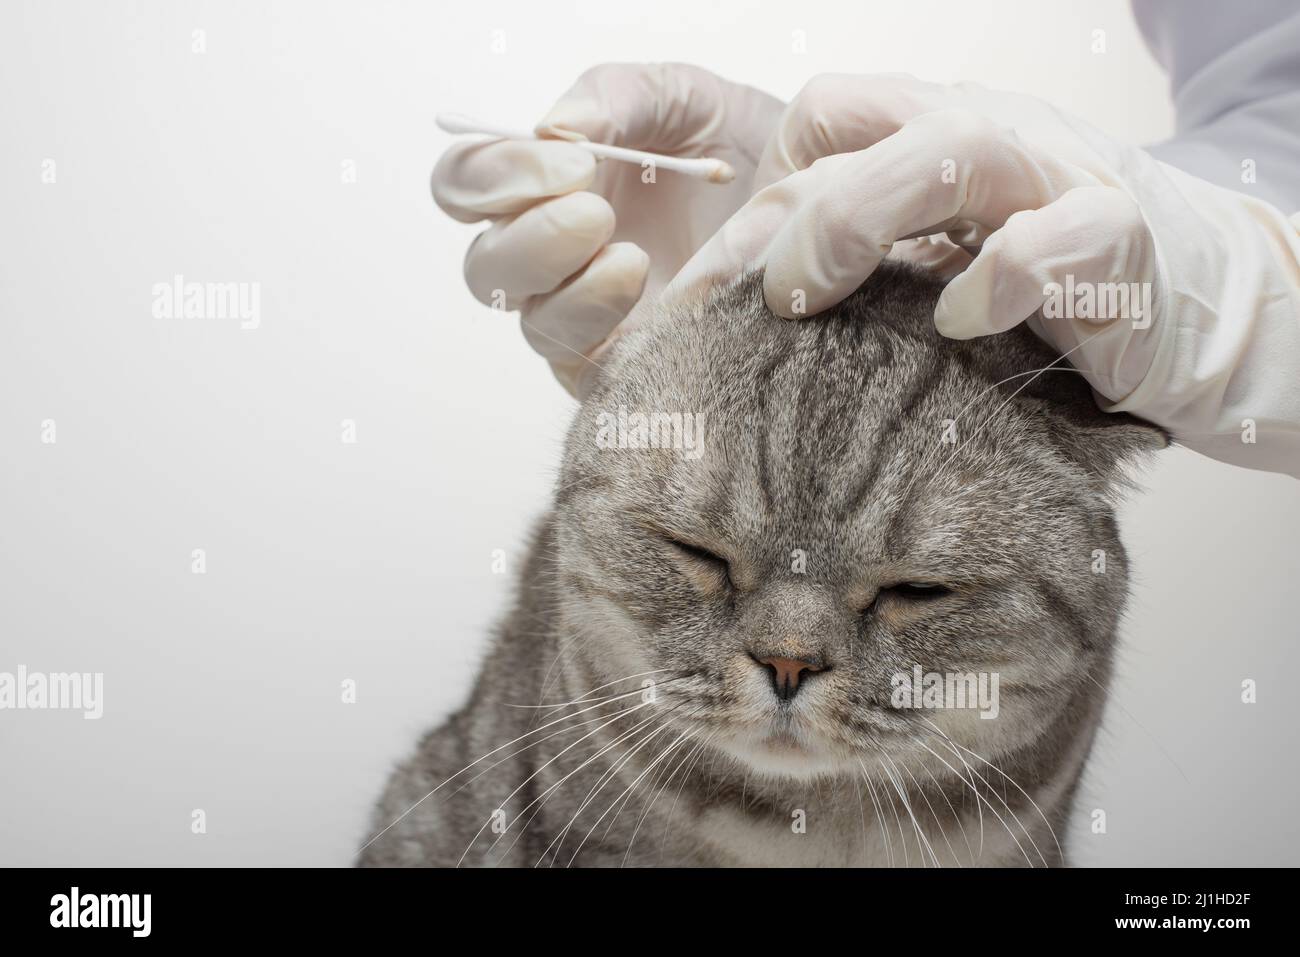 The vet clears the ears of a Scottish cat on a white background, isolated with an empty space for the inscription Stock Photo